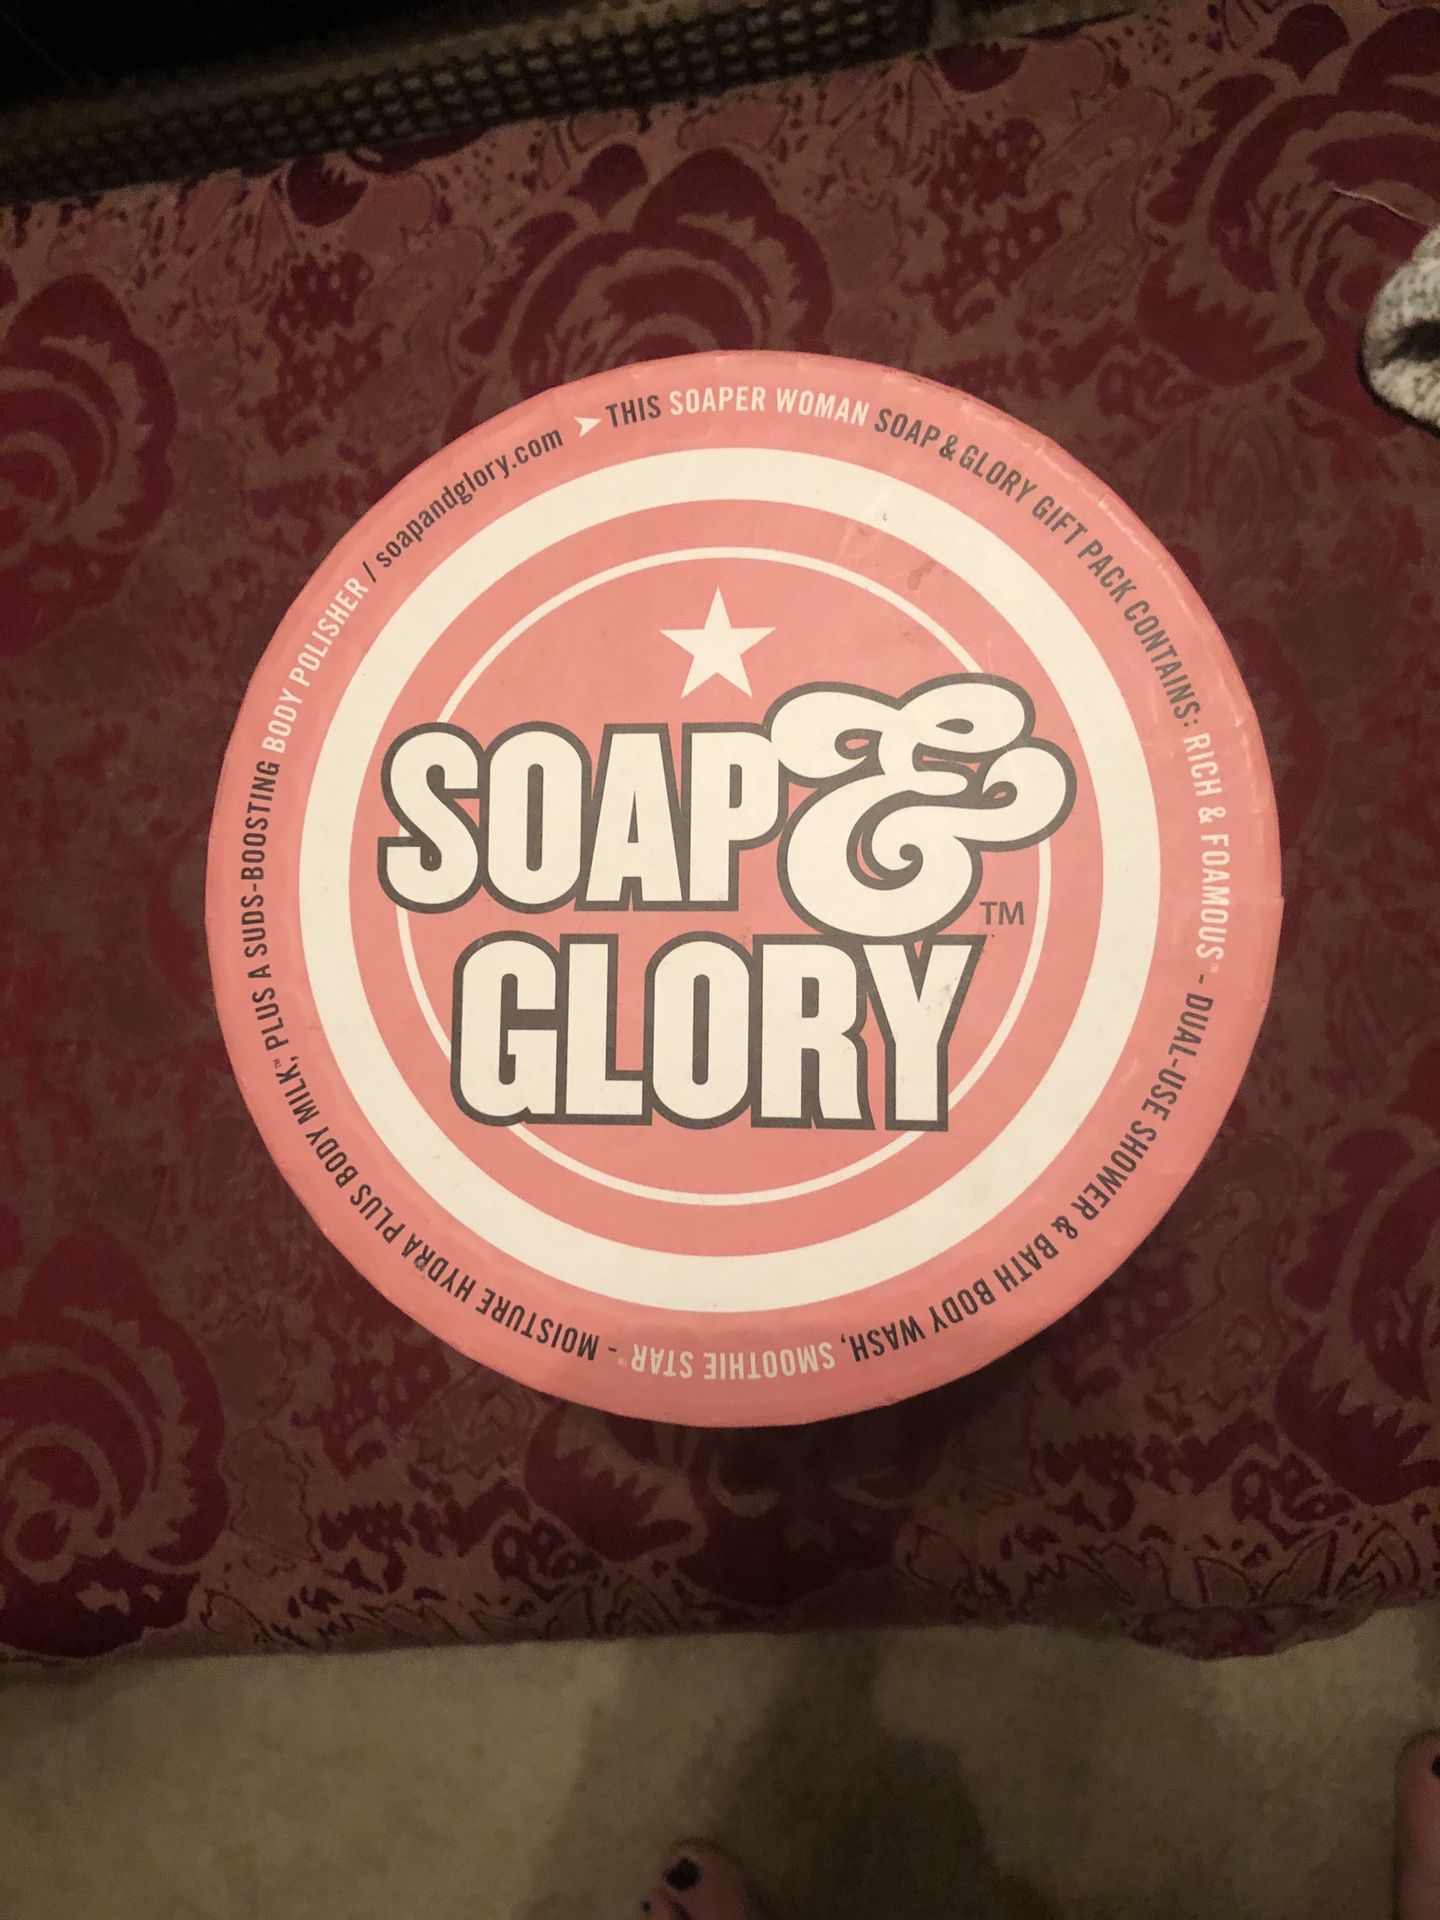 Soap and body wash set